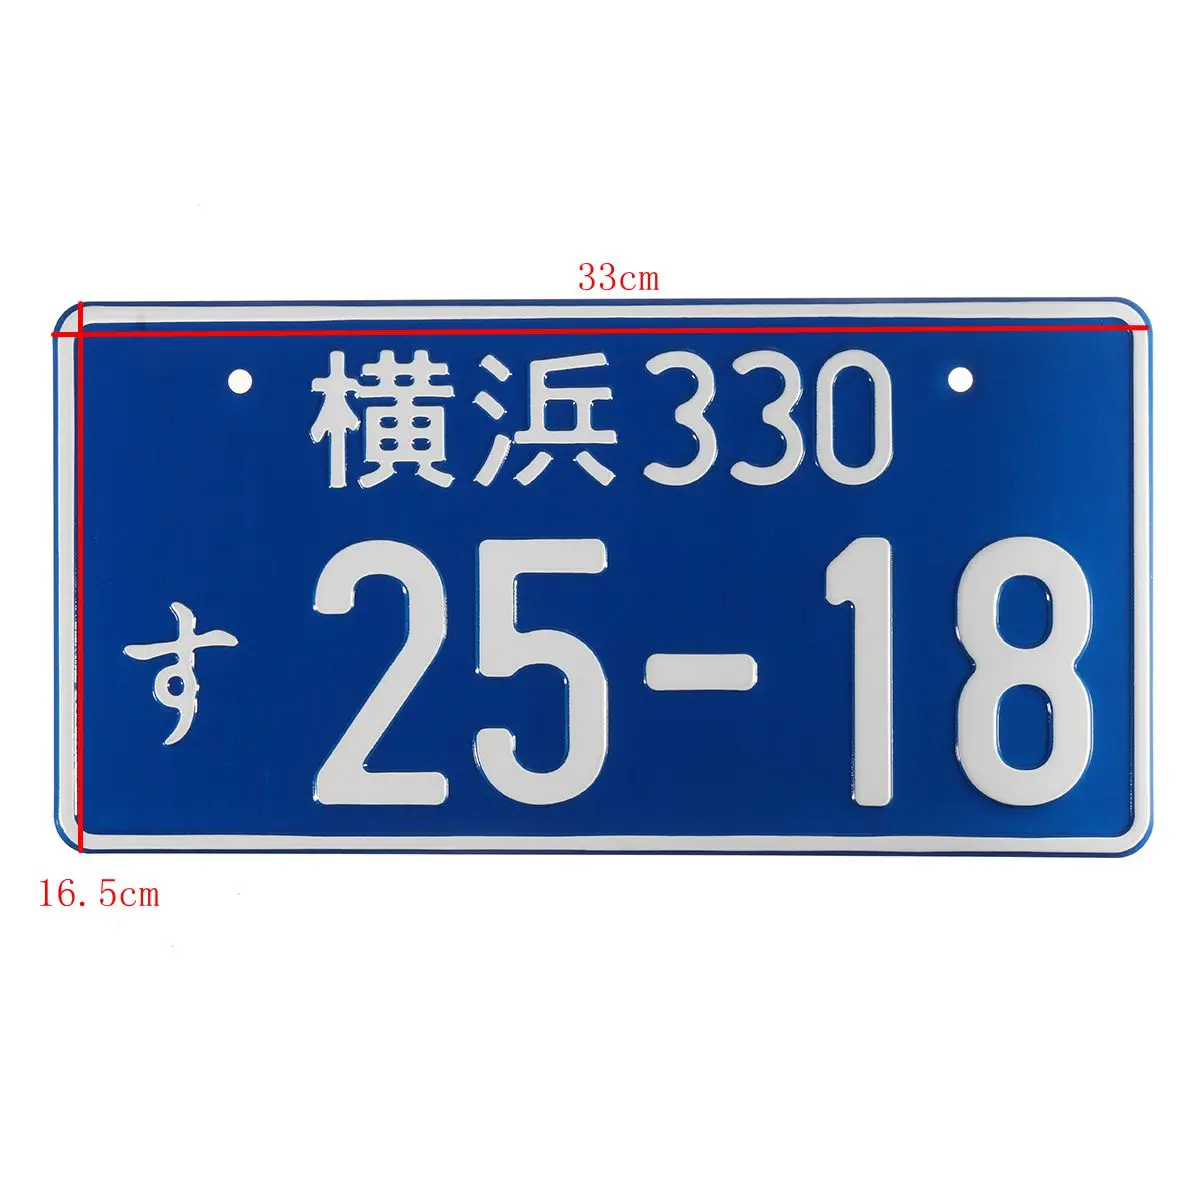 New Universal Japanese Car Numbers License Plate Aluminum Tag for Jdm Kdm Racing Car Motorcycle Multiple Color